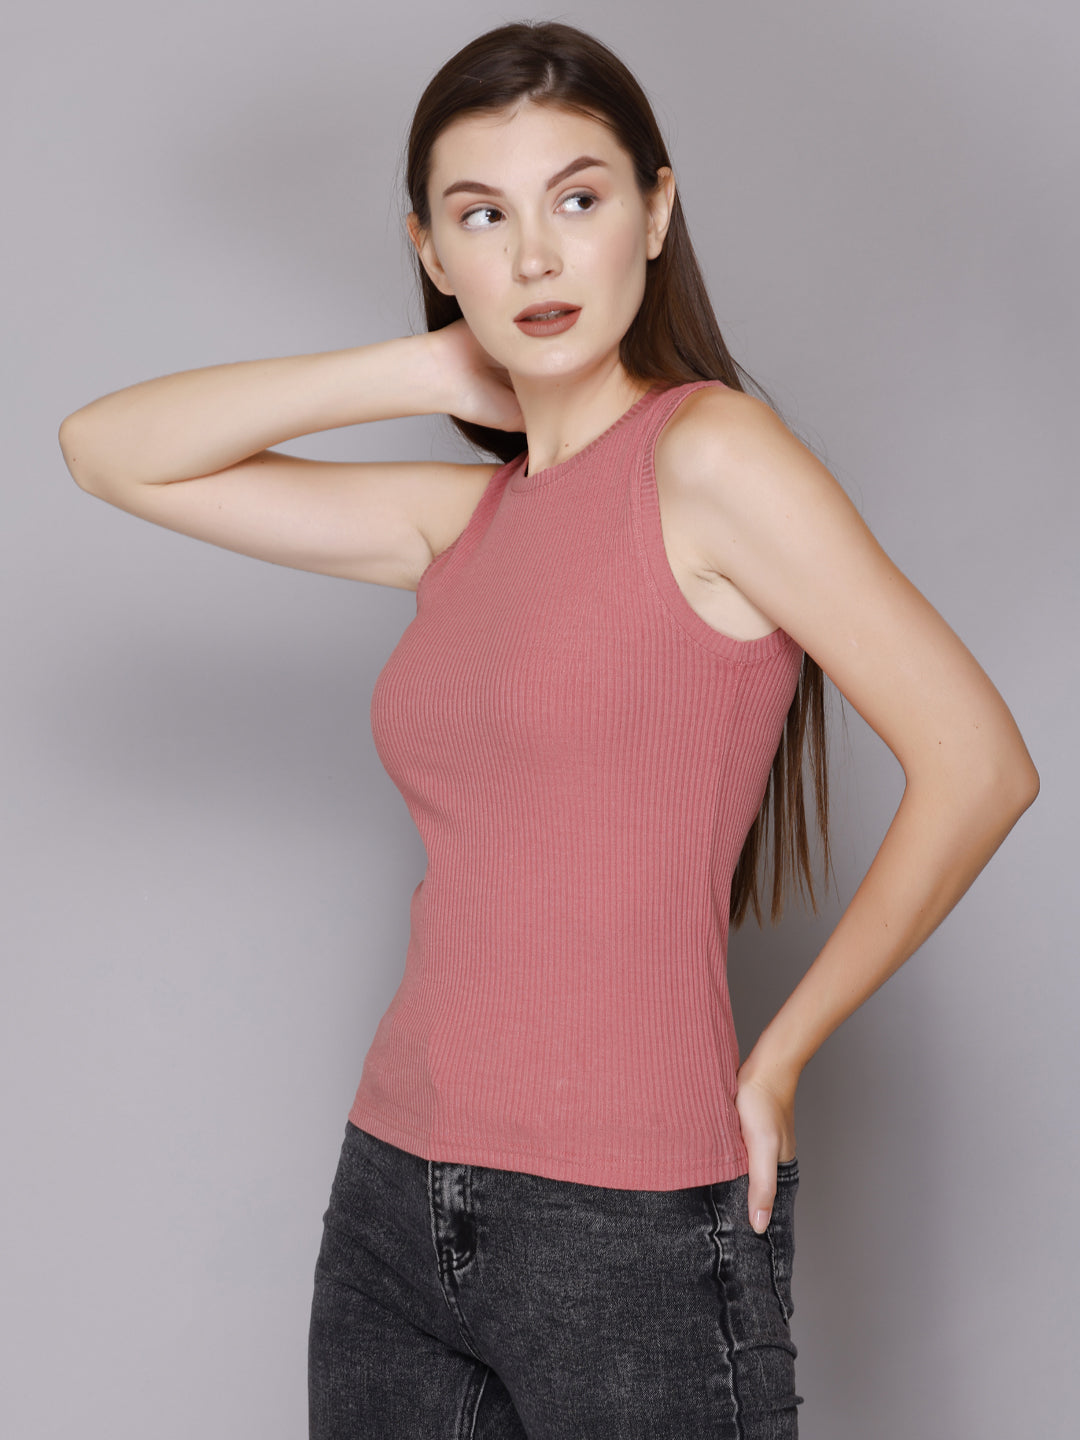 Stylish Modish Rib Tank Top For Women/ Girls Online In India At Best Prices